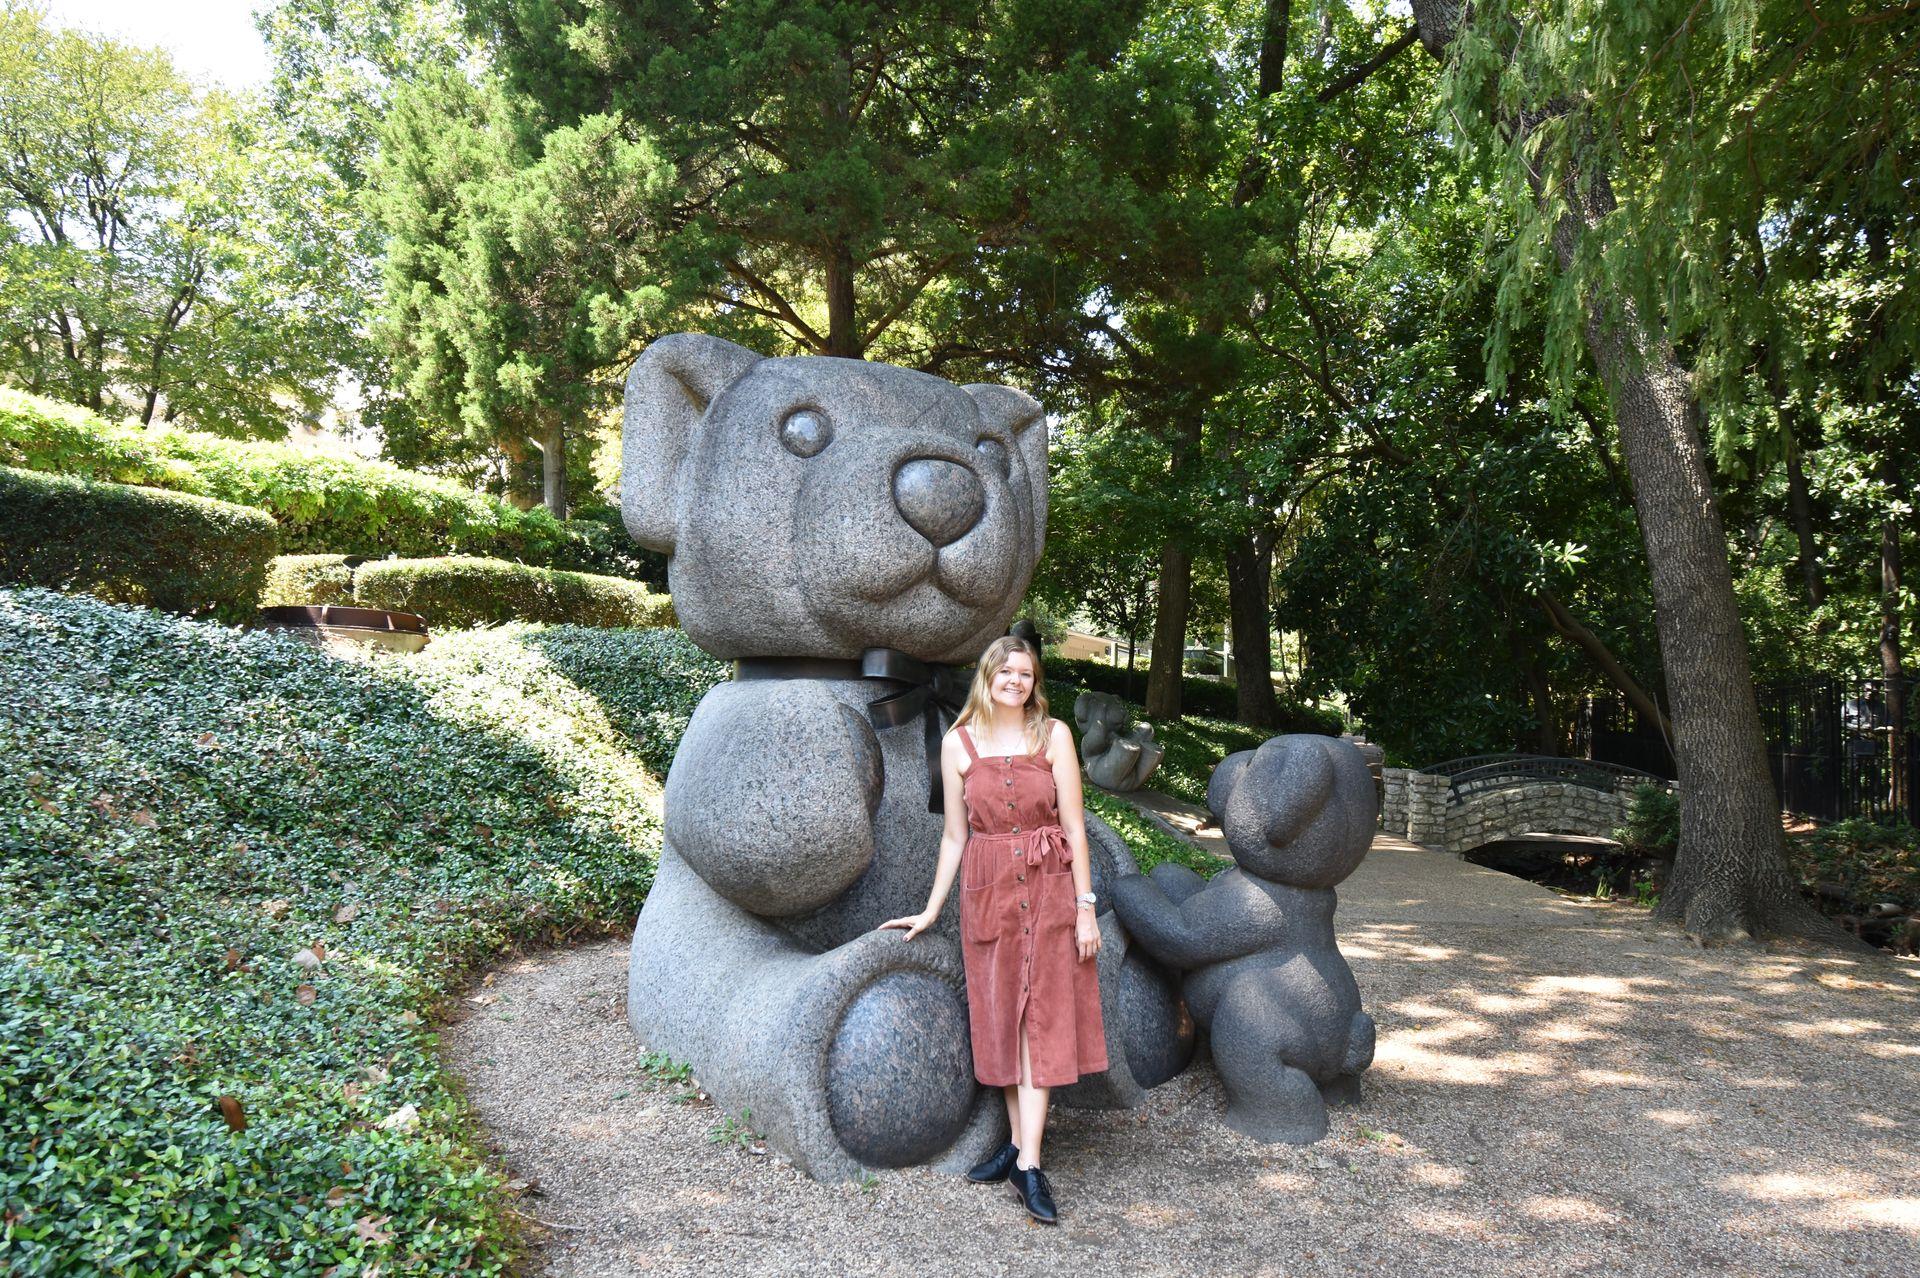 Lydia standing in front of a giant teddy bear statue.